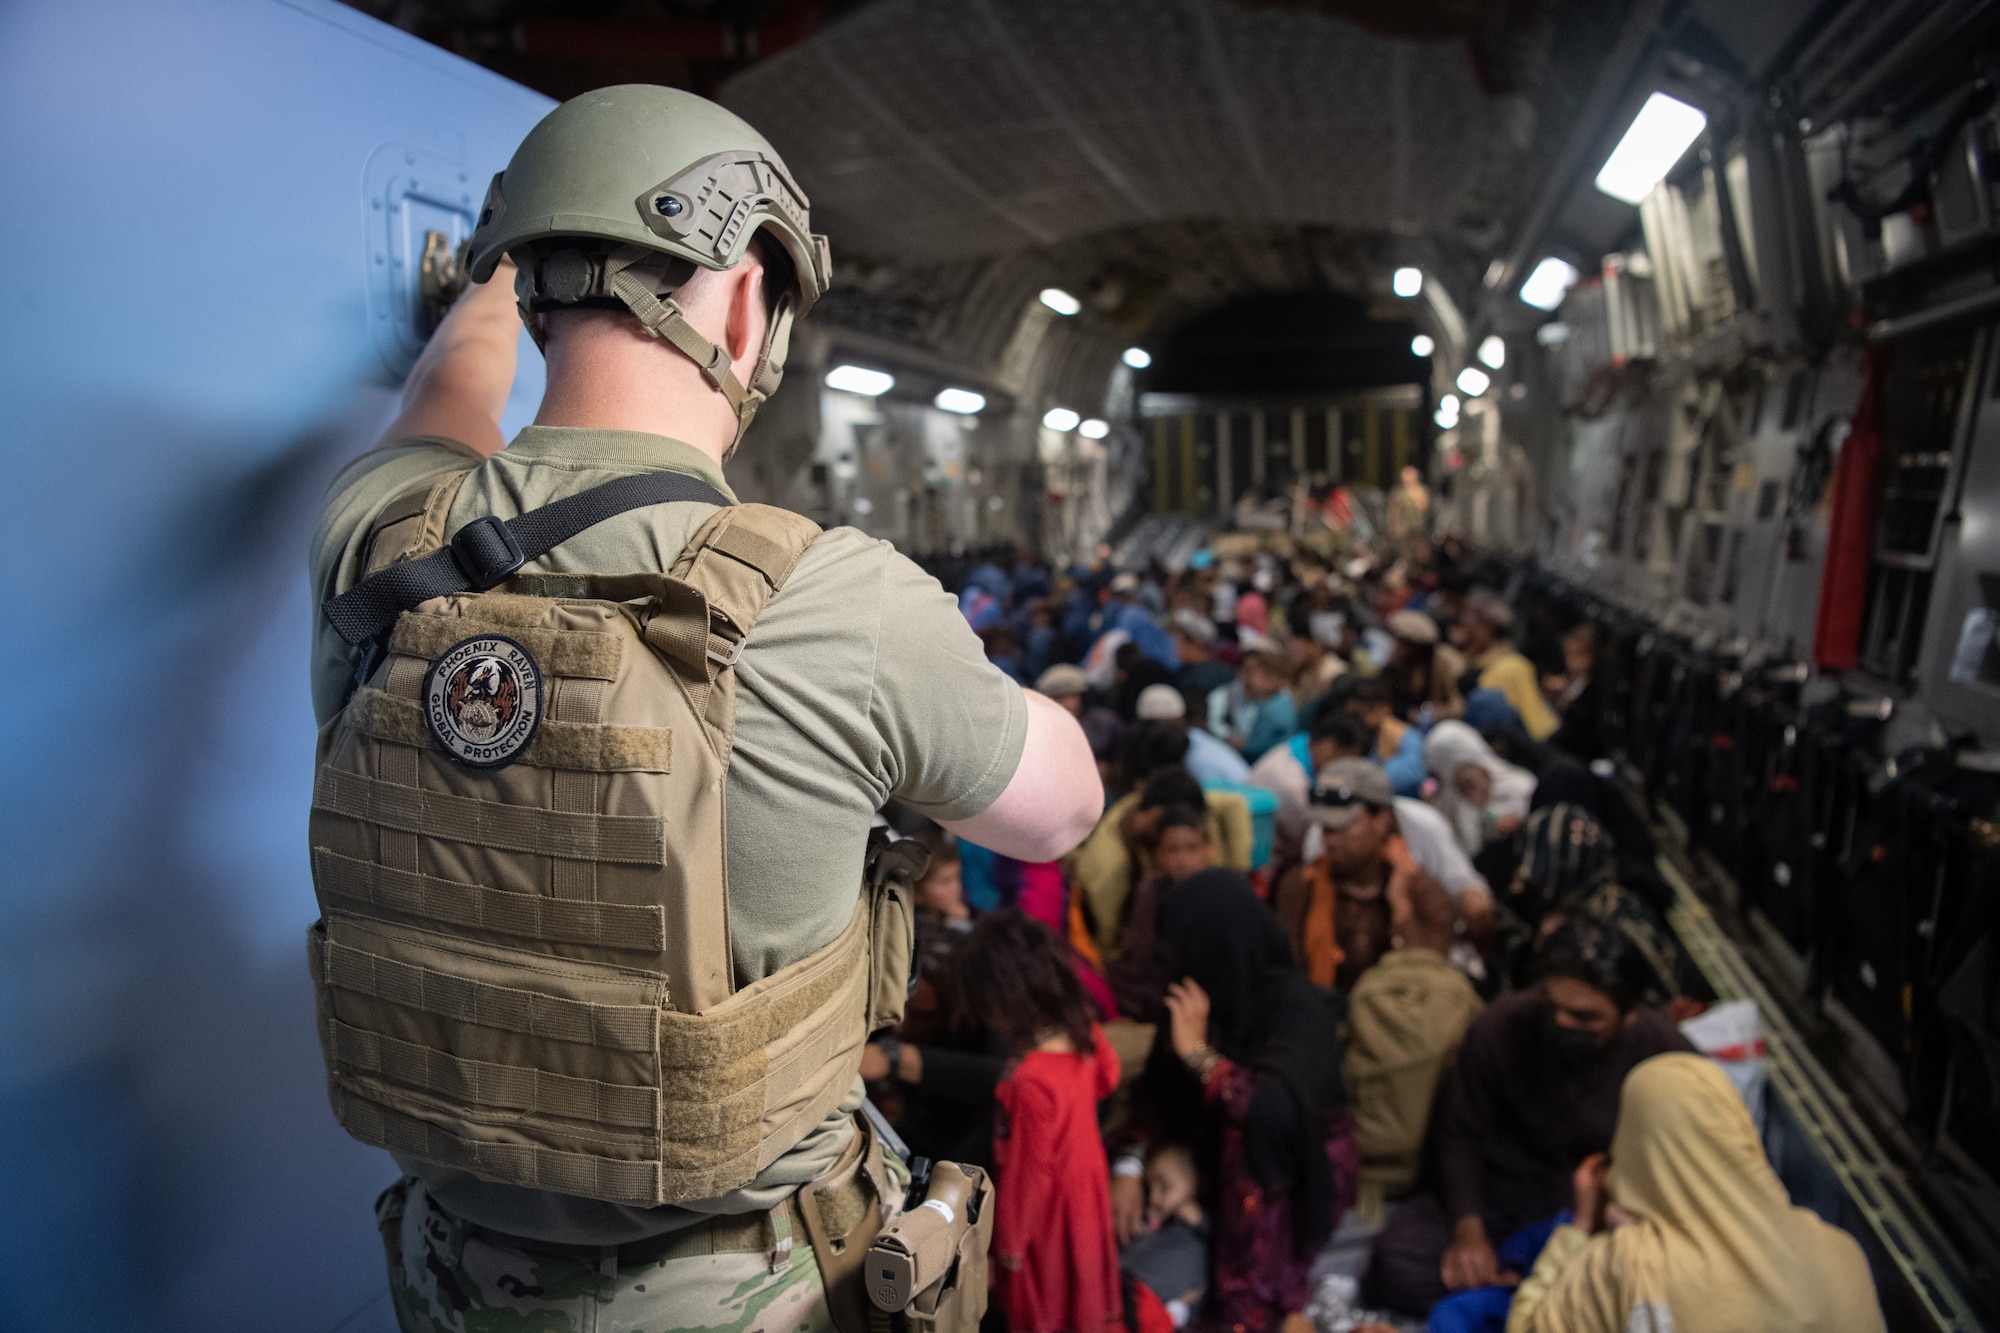 A U.S. Air Force security forces raven, assigned to the 816th Expeditionary Airlift Squadron, maintains security aboard a U.S. Air Force C-17 Globemaster III aircraft in support of the Afghanistan evacuation at Hamid Karzai International Airport (HKIA), Afghanistan, Aug. 24, 2021.